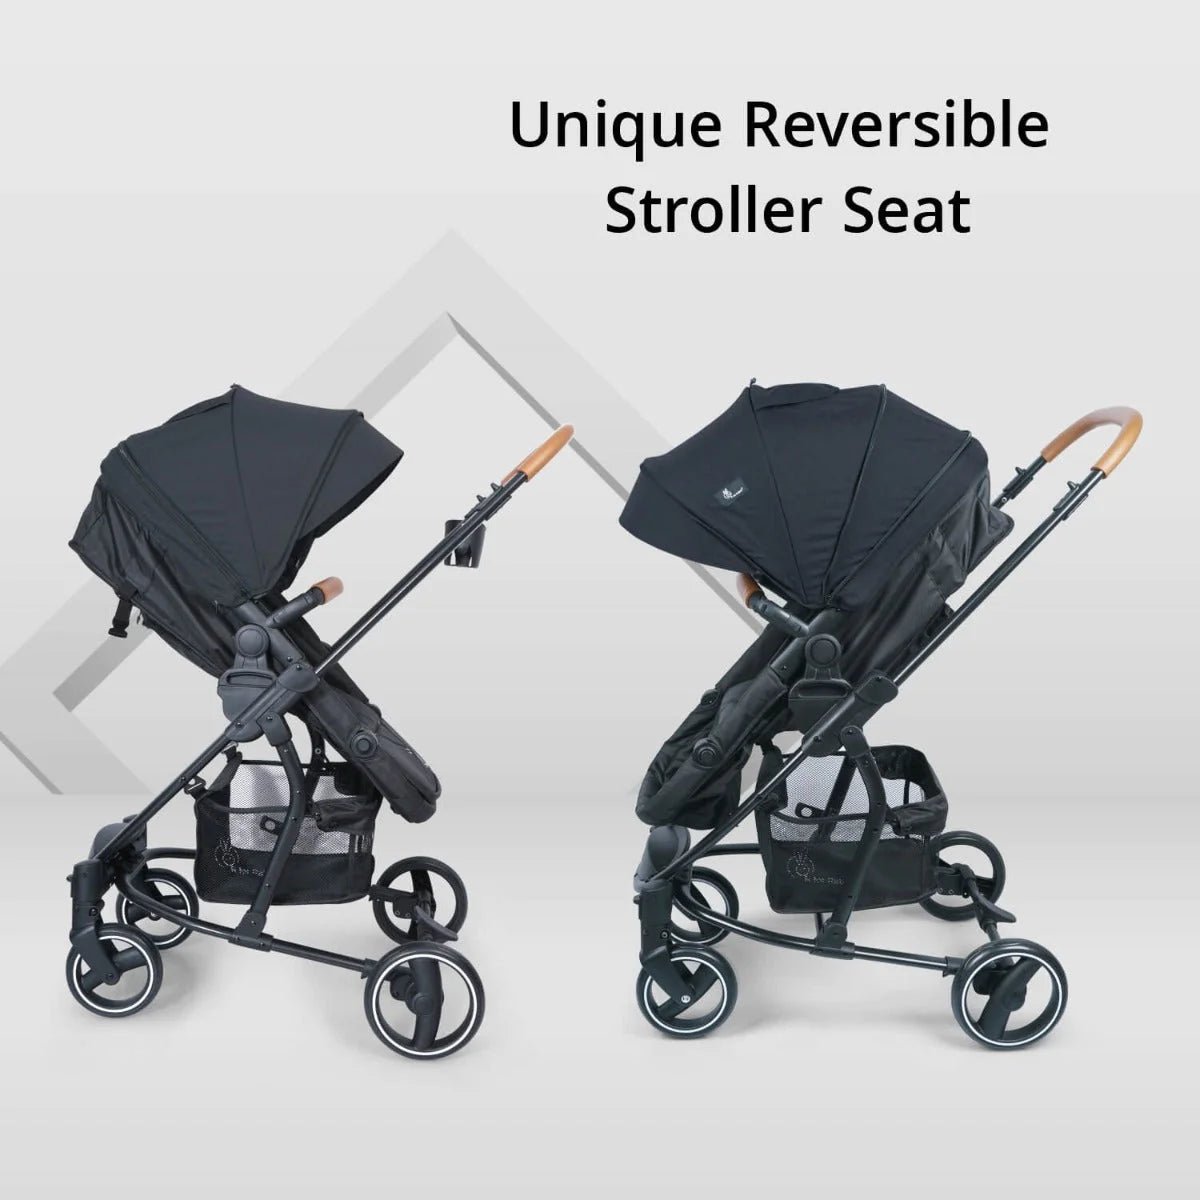 R for Rabbit Paradise 2 In 1 Baby Stroller Cum Carry Cot